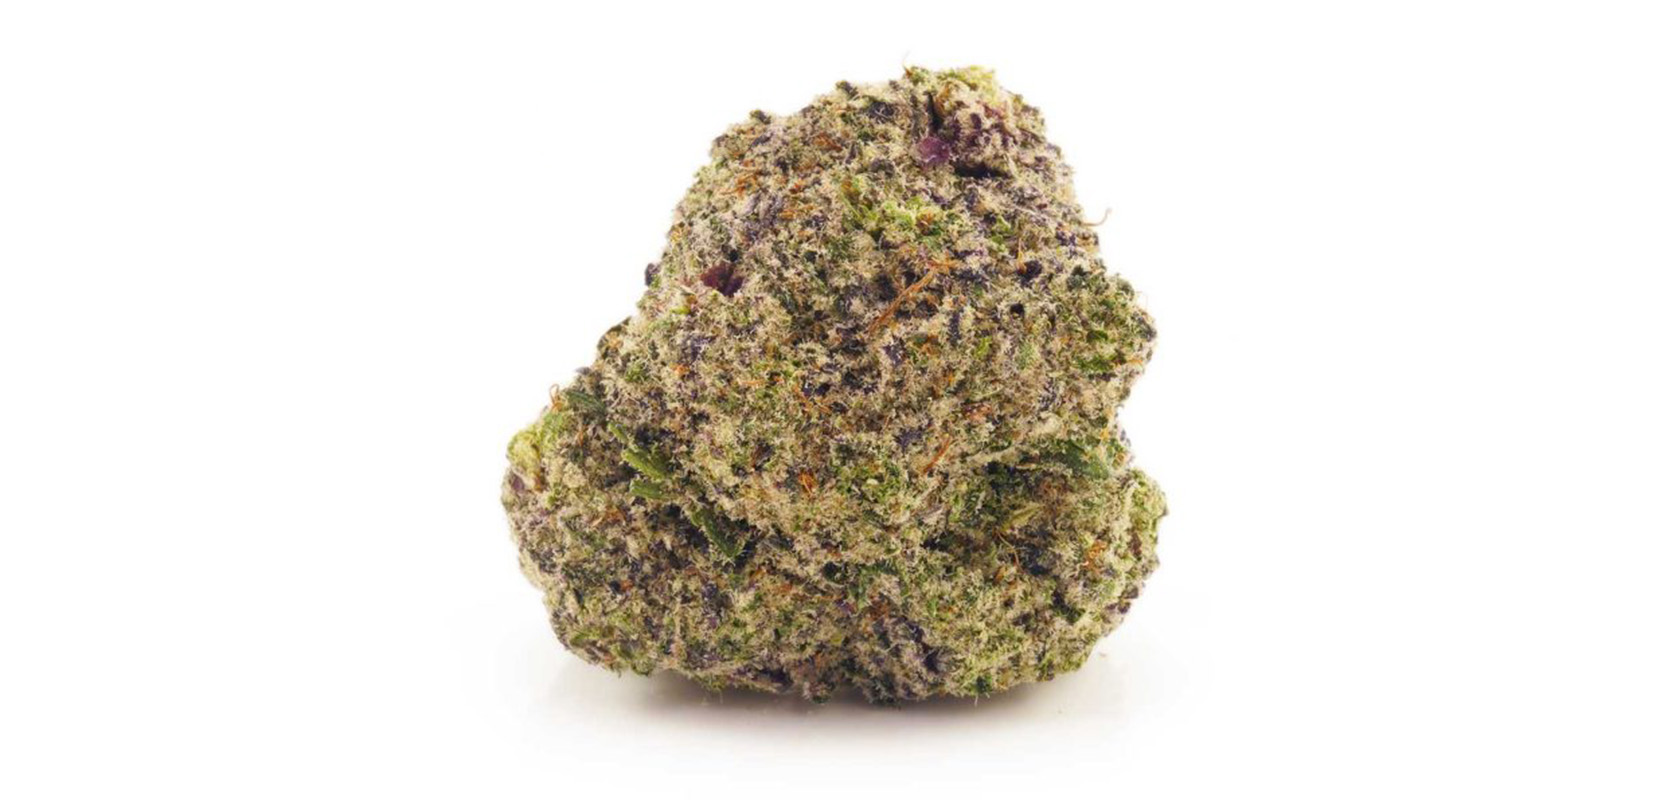 Craft cannabis Supreme Dragon Fruit Kush dispensary weed for sale online from mail order marijuana weed dispensary Bud Express Now.